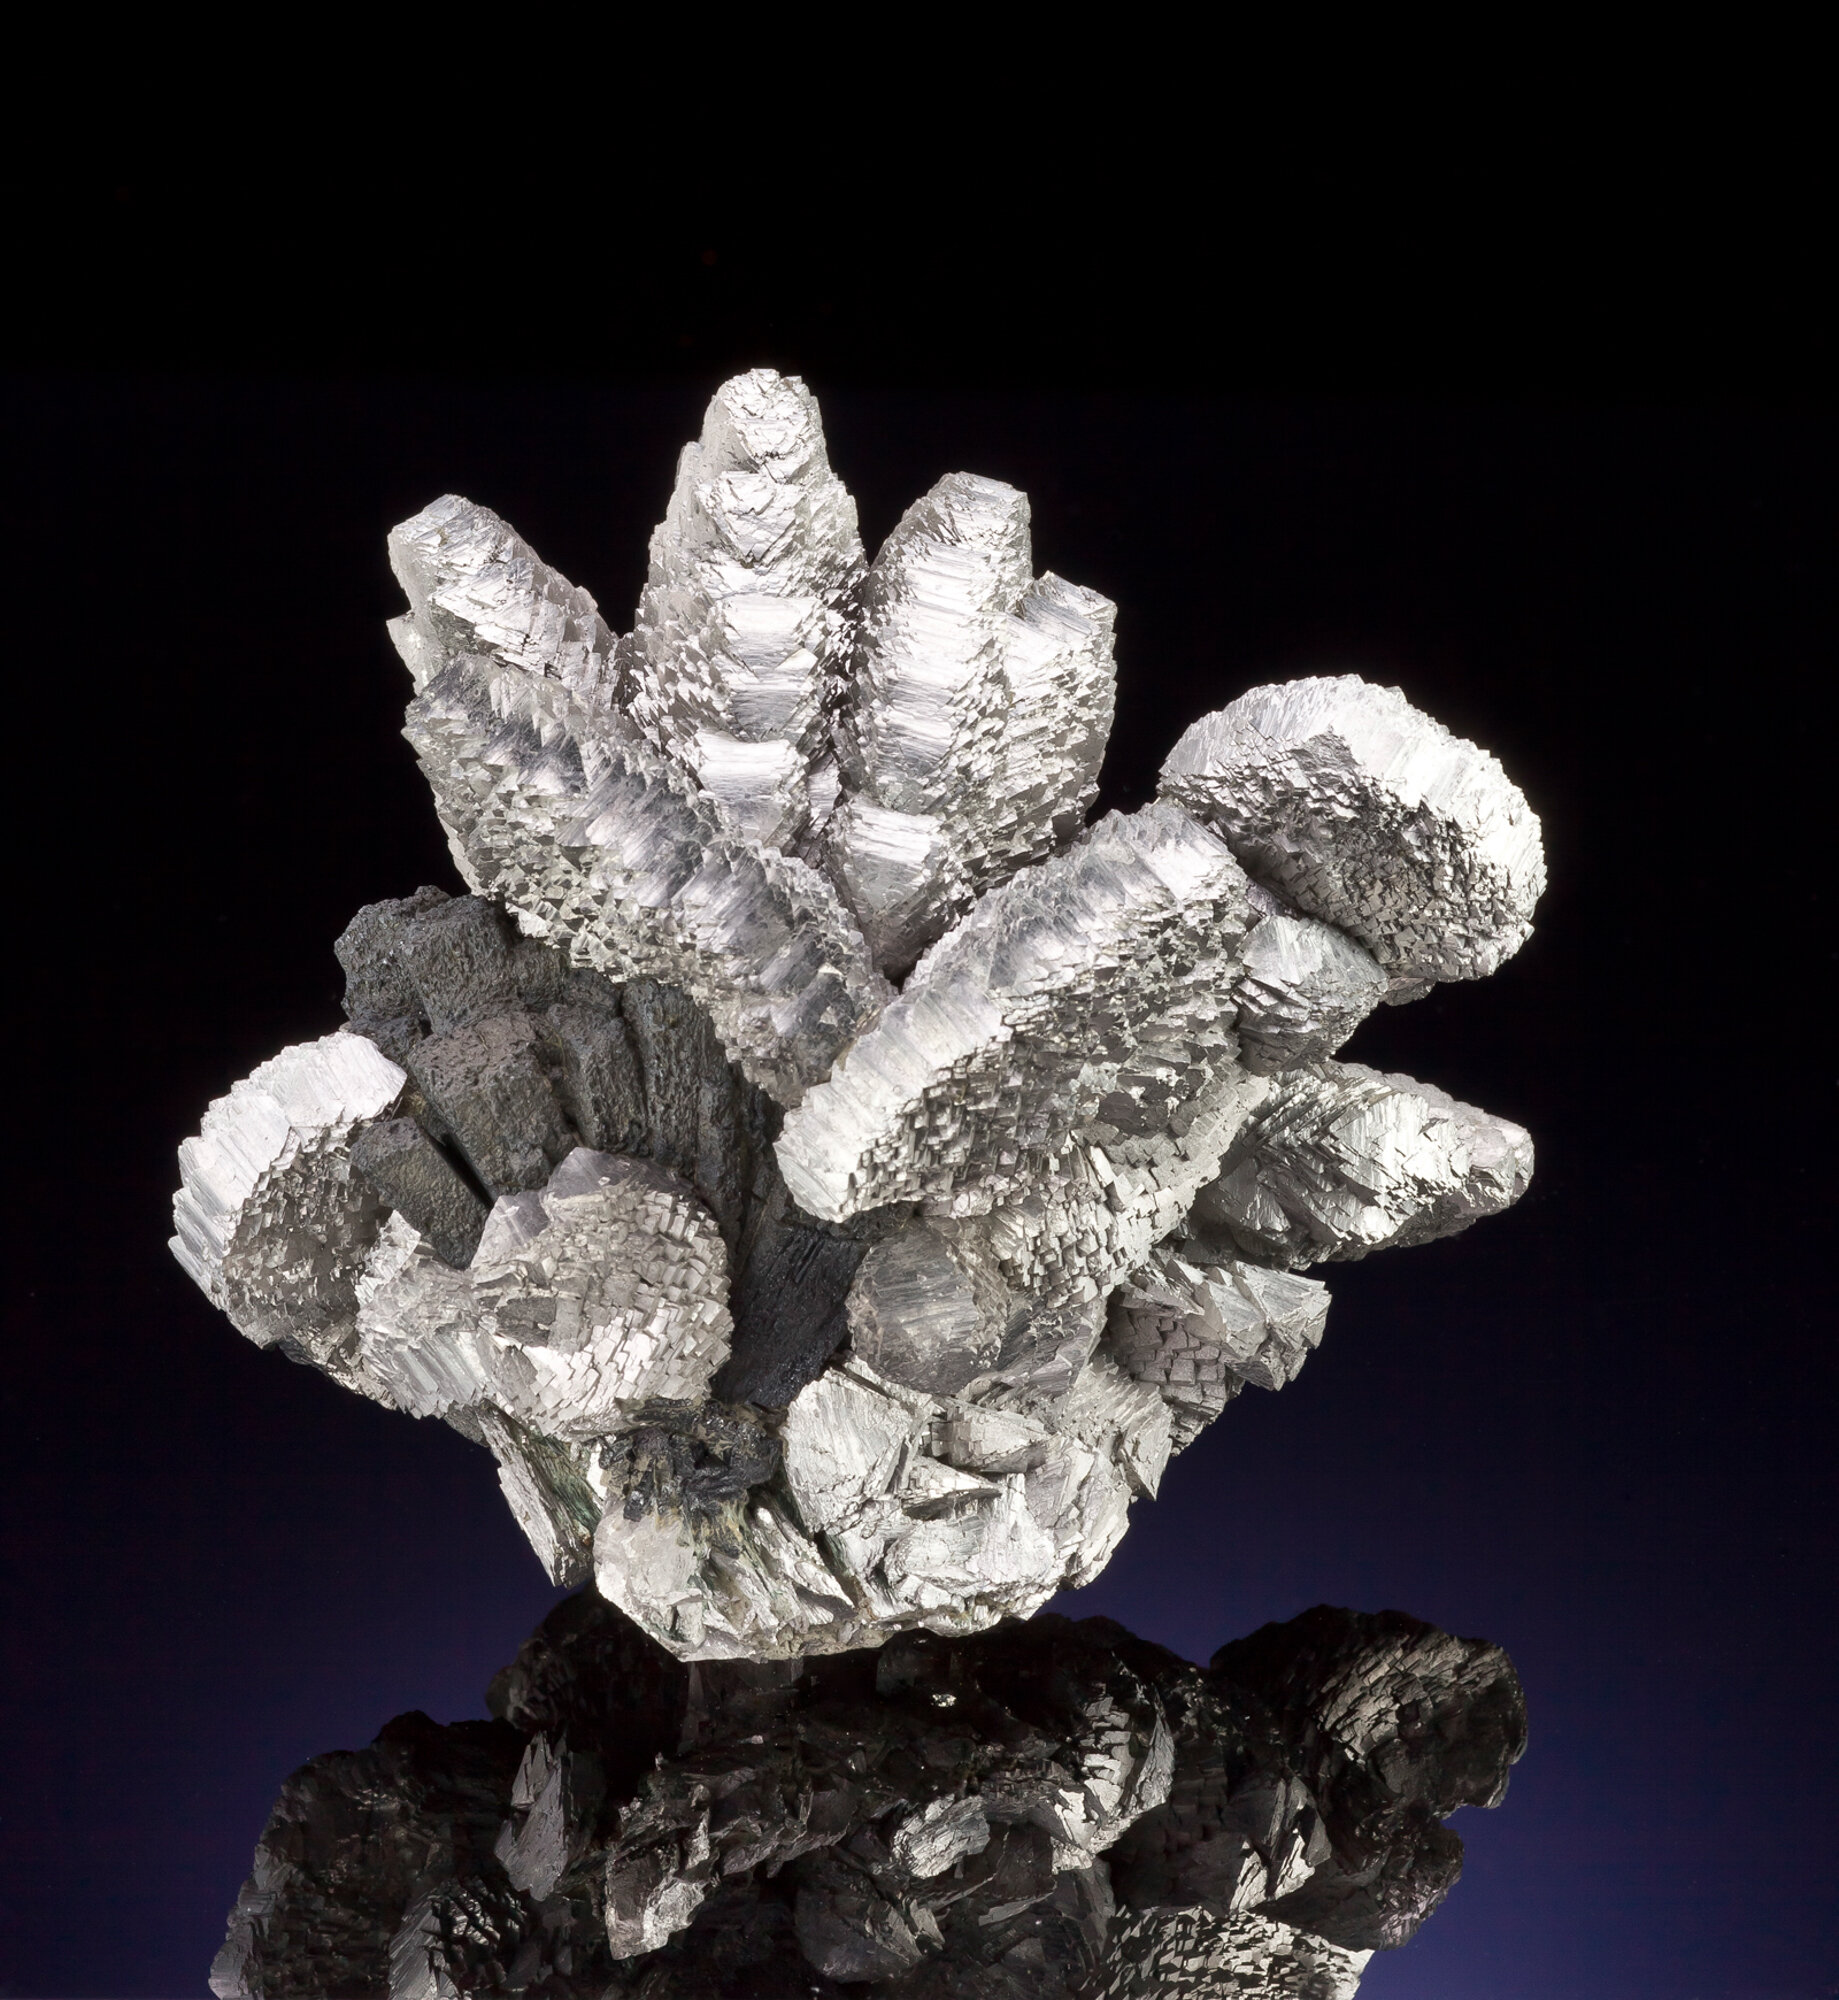  Arsenopyrite crystal group on ilvaite, 12.7 cm, from the Huanggang mine, Keshiketeng County, Chifeng Prefecture, Inner Mongolia Autonomous Region, China. Found in 2011. 